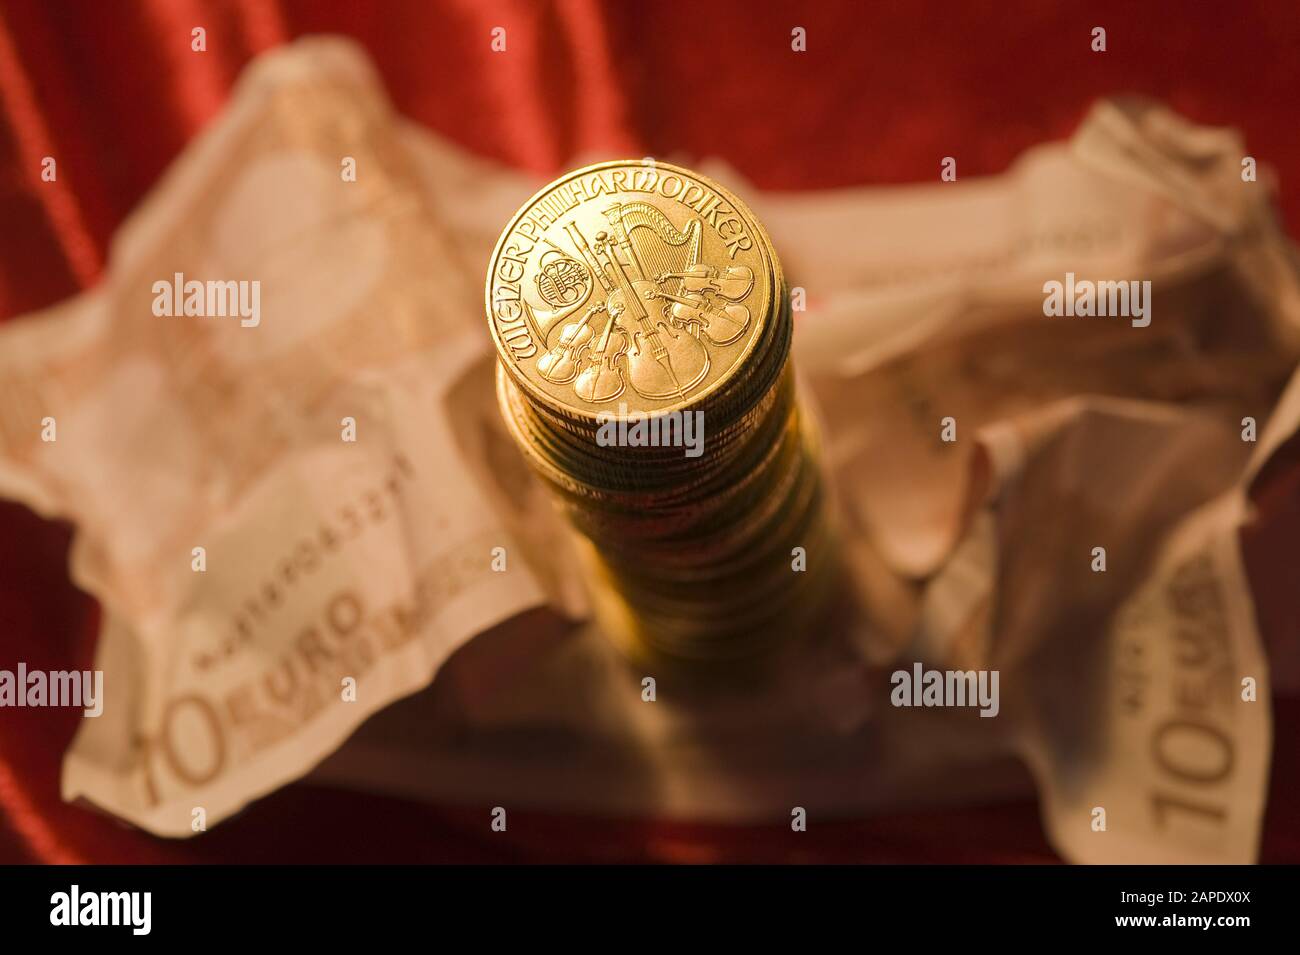 Gold und Papiergeld - Gold Coins and Euro Banknotes Stock Photo